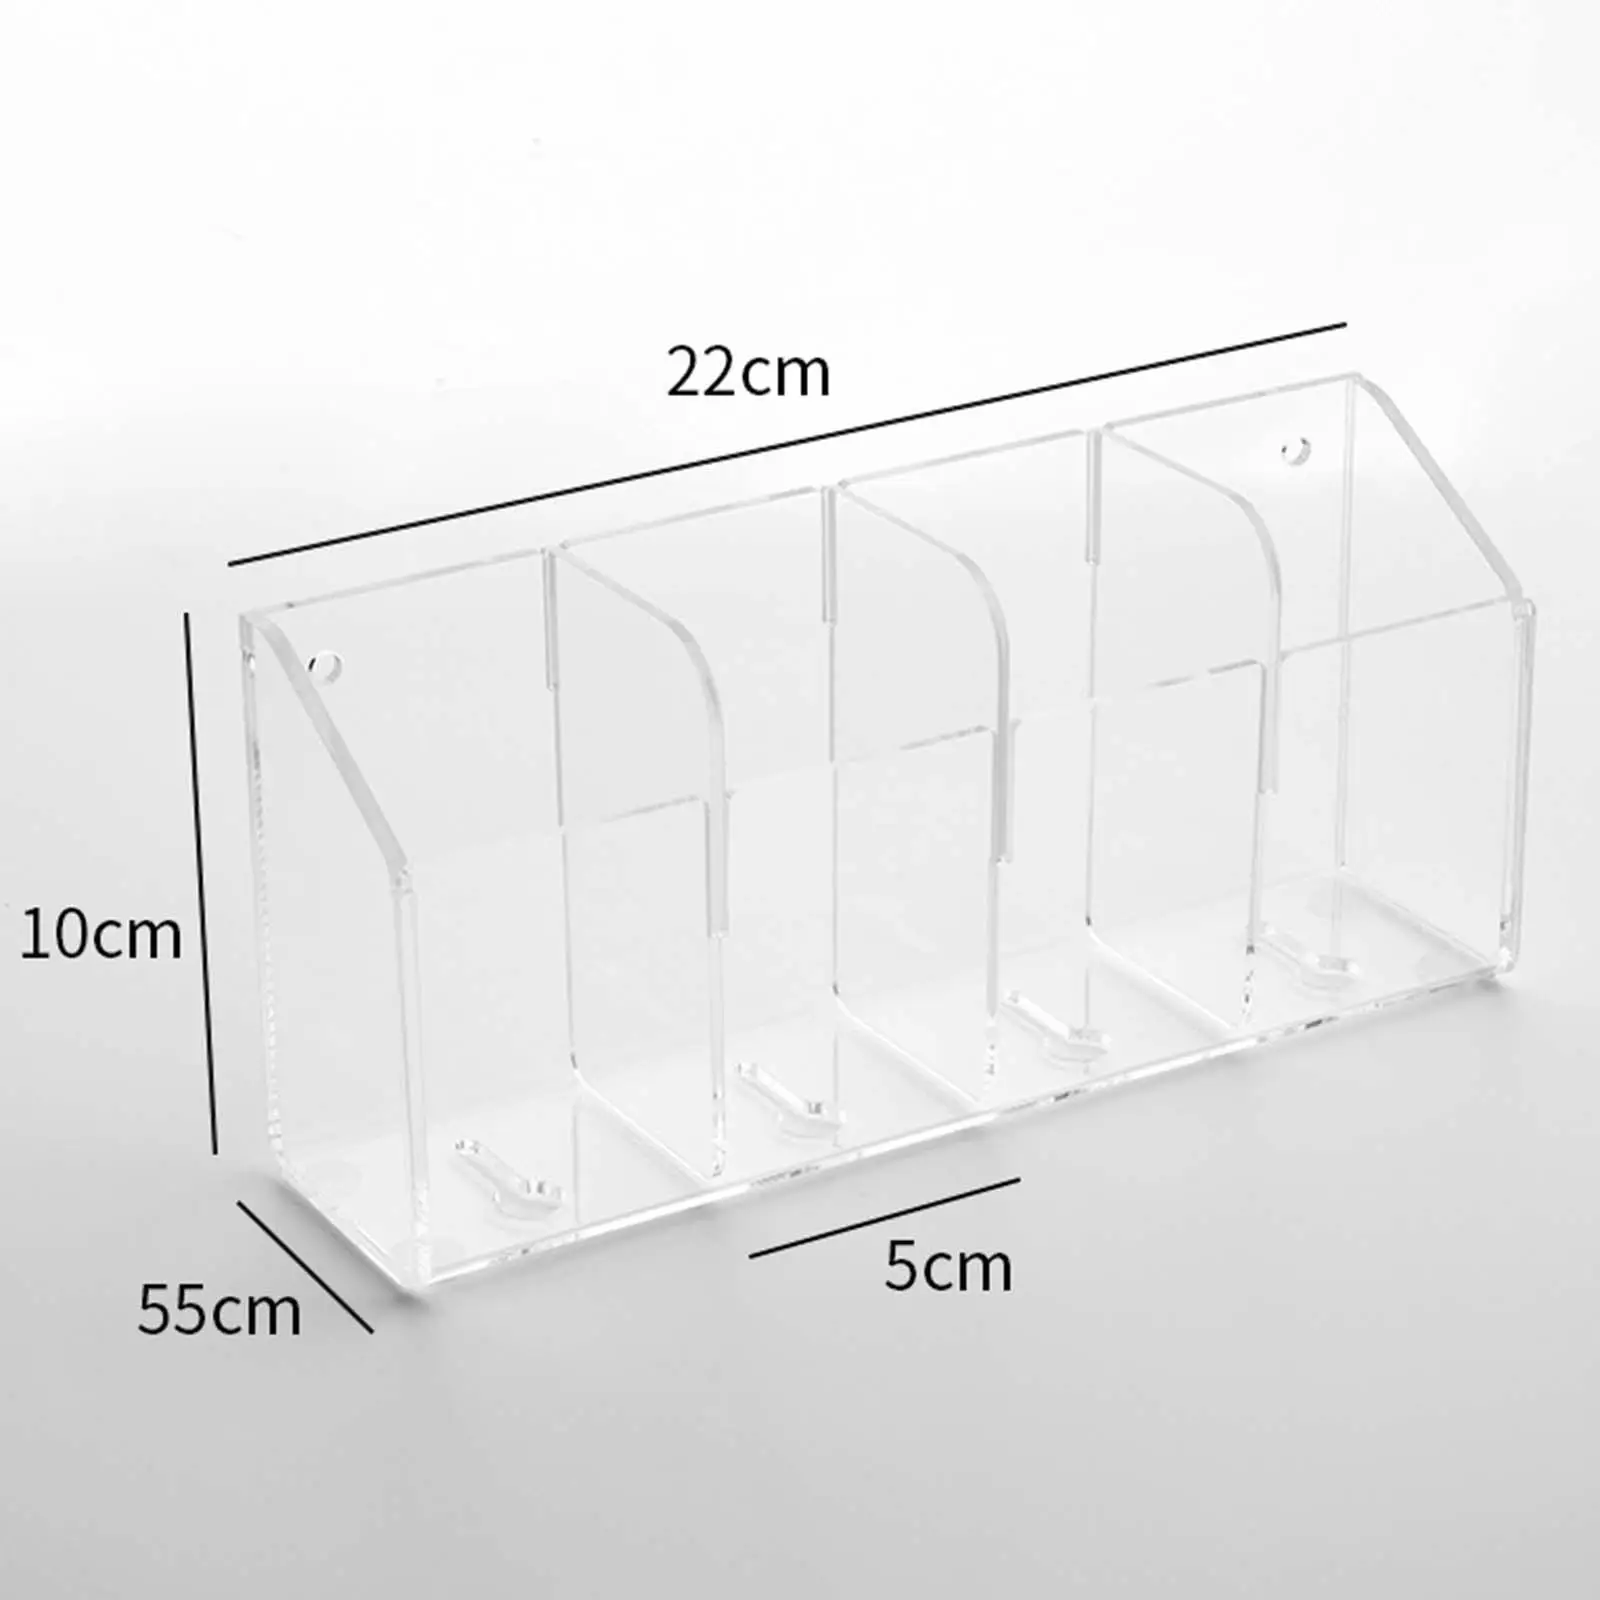 Remote Control Holder Multipurpose Acrylic Storage Box Housewarming Gifts Punch Free for Bathroom Desk Dressers NightStand Pen